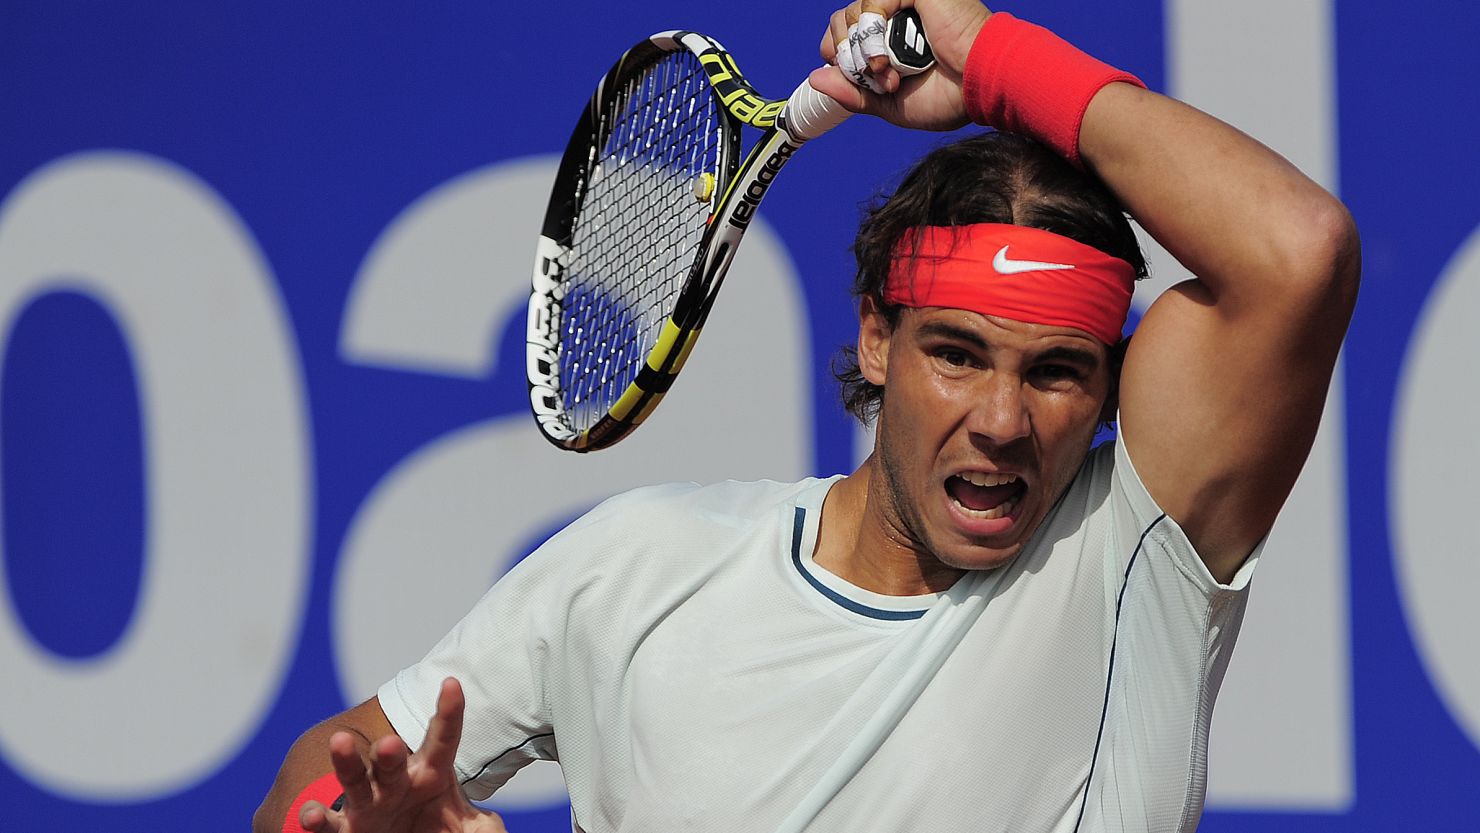 Rafael Nadal will play 64th ranked Albert Ramos in the next round of the Barcelona Open.